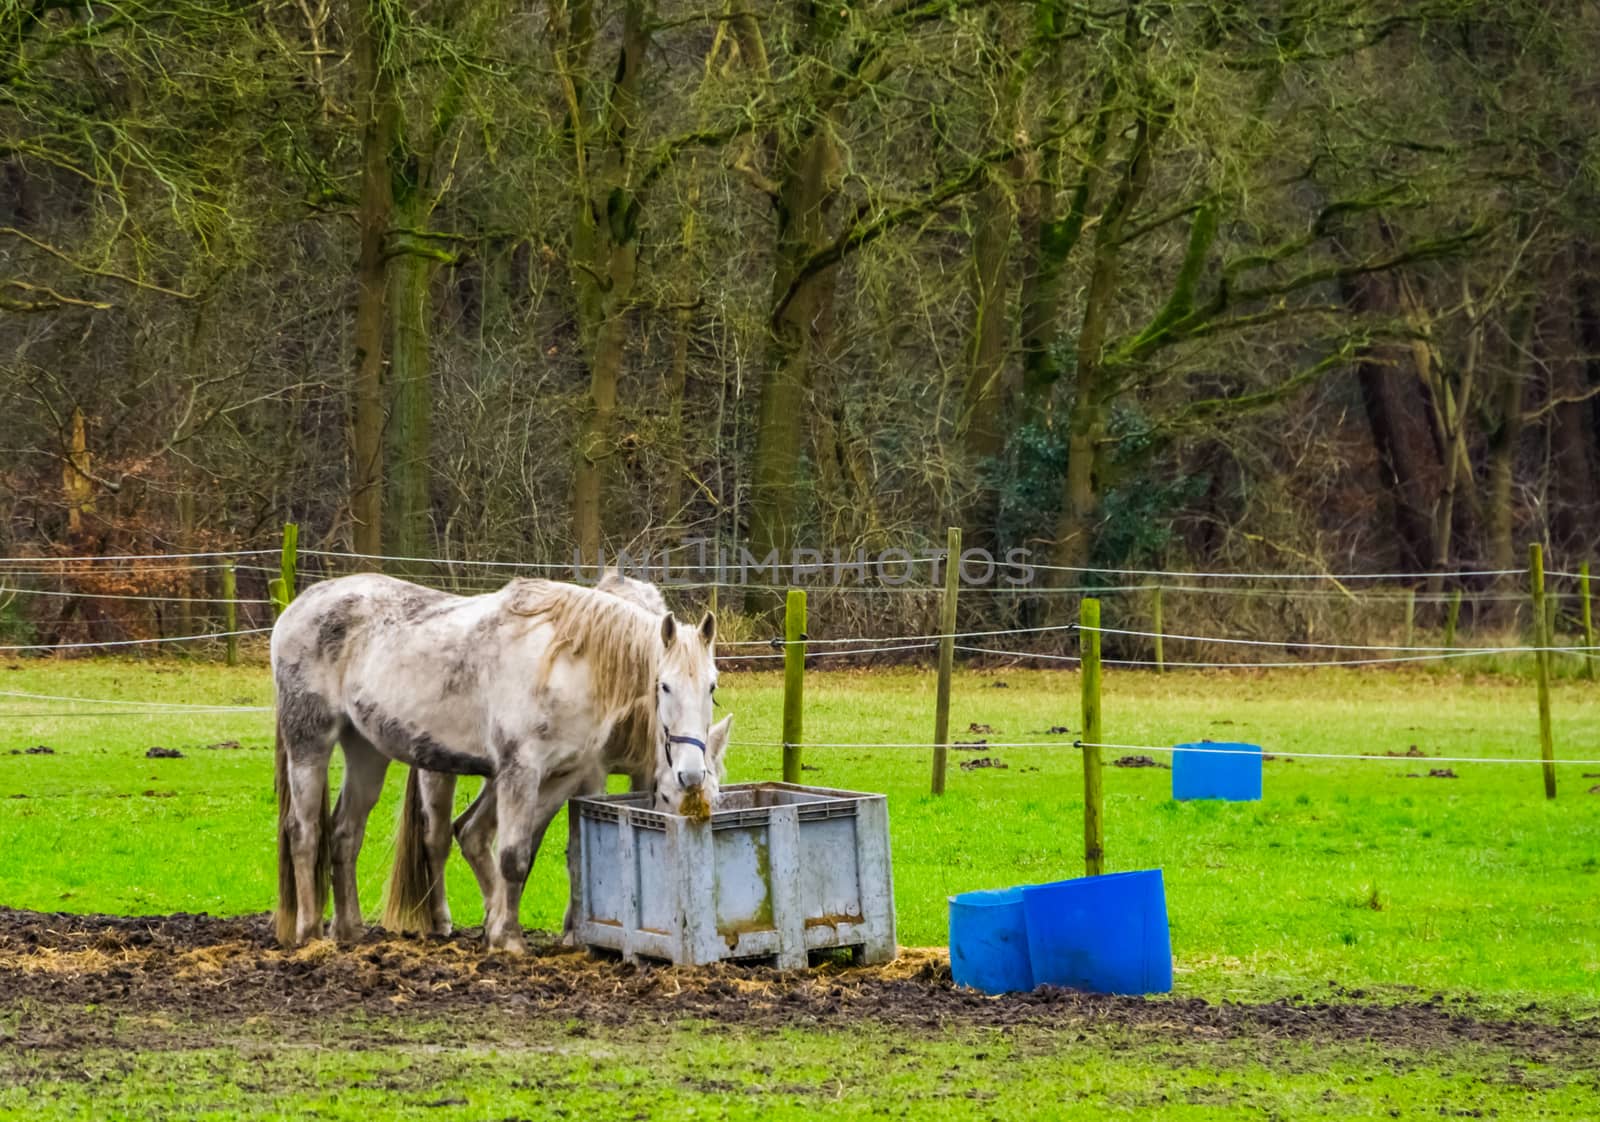 white horse couple eating hay out of basket together in the pasture, pet and animal care by charlottebleijenberg